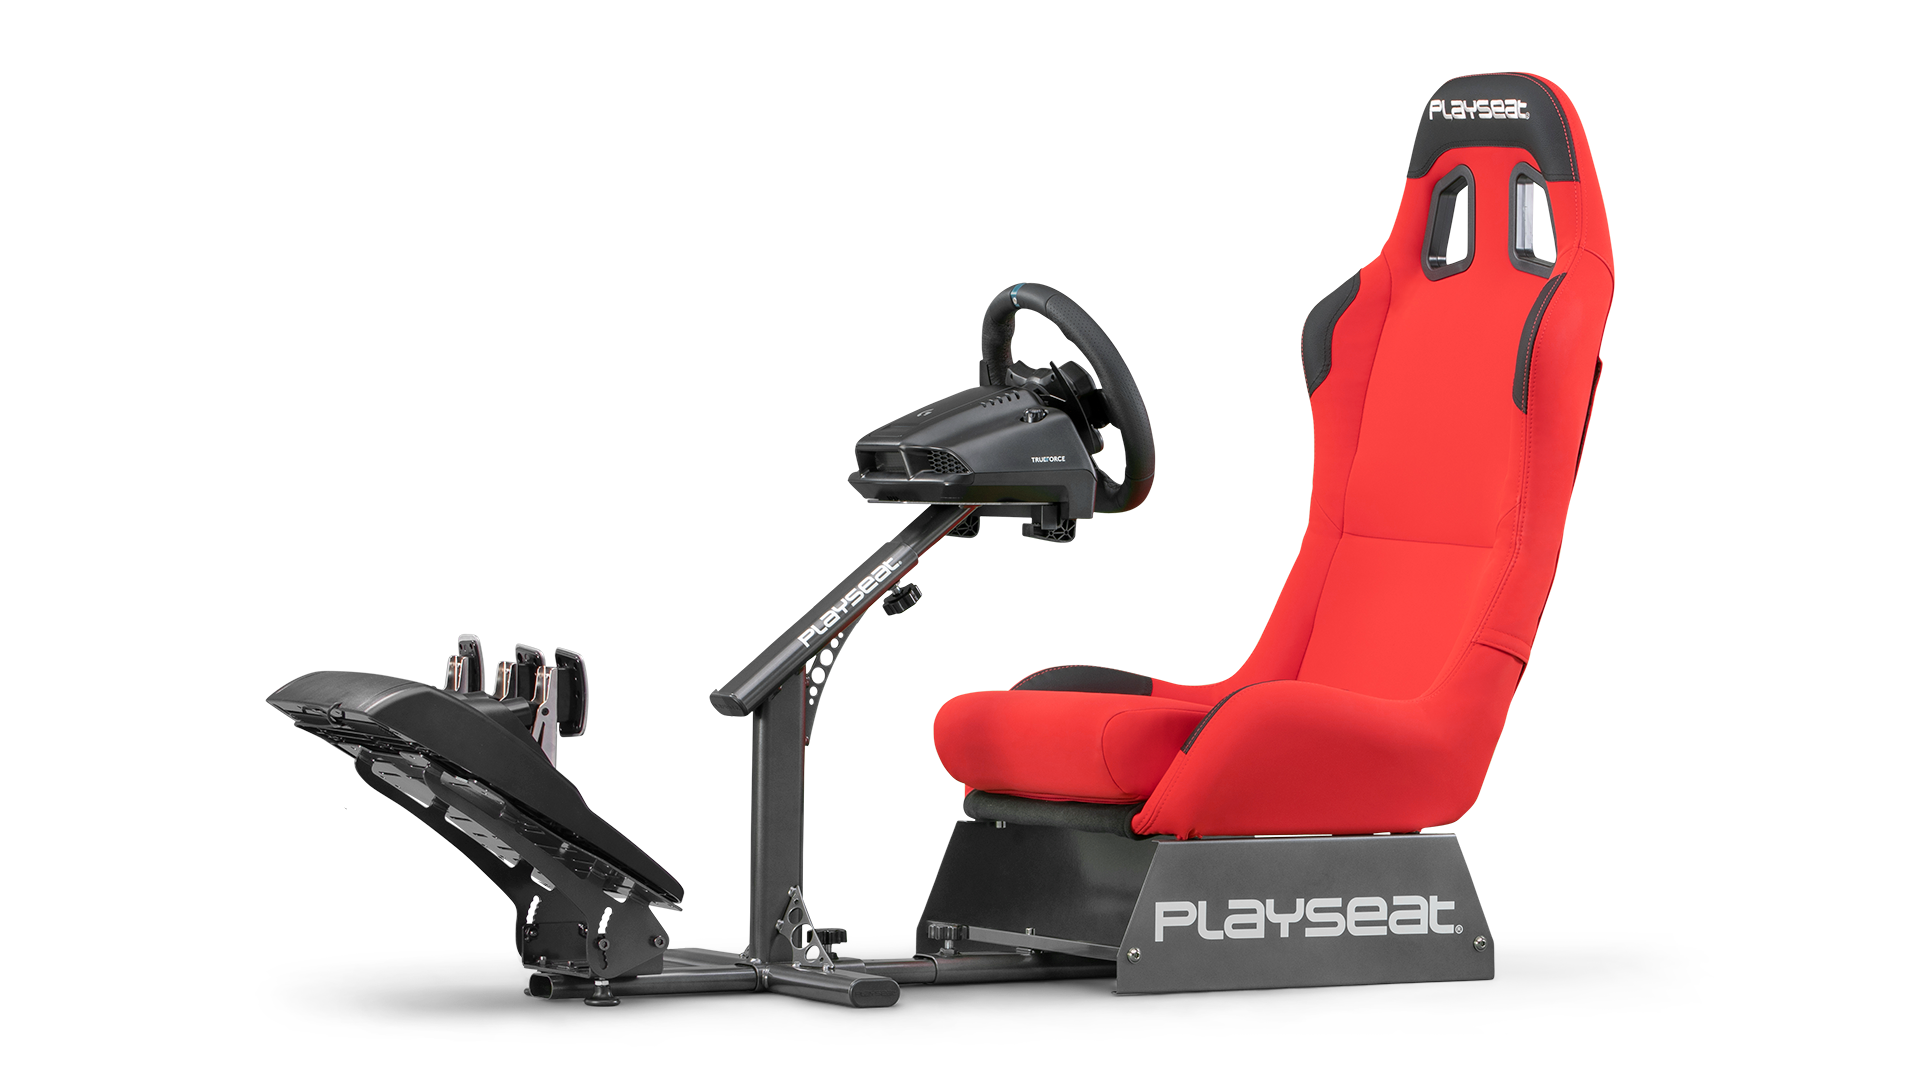 playseat-evolution-red-racing-simulator-front-angle-view-logitech-1920x1080-1.png